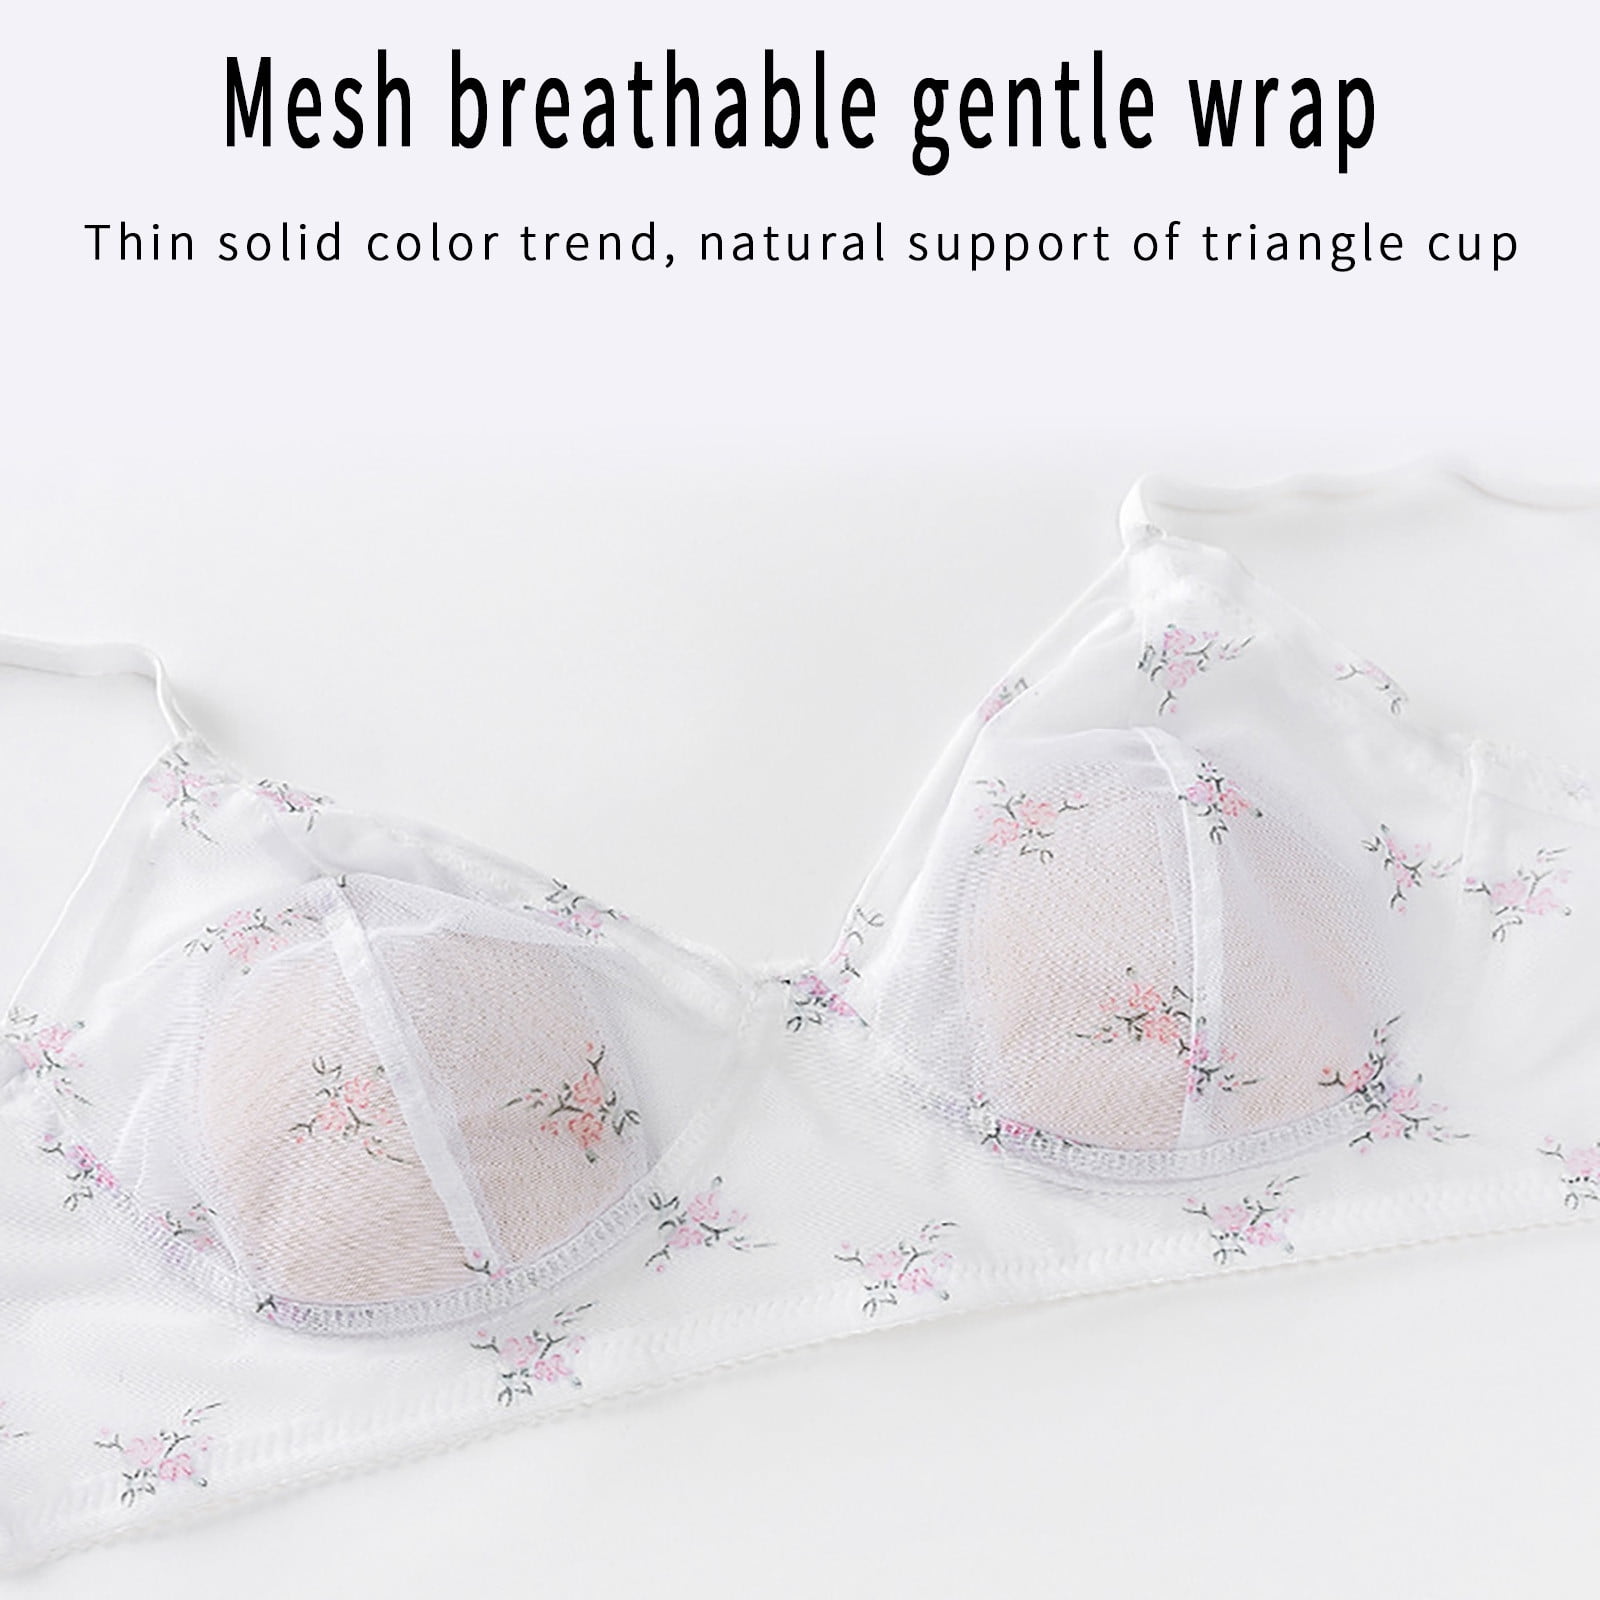 YUANCHNG Women Embroidery Floral Bras Ultra Thin No Padding